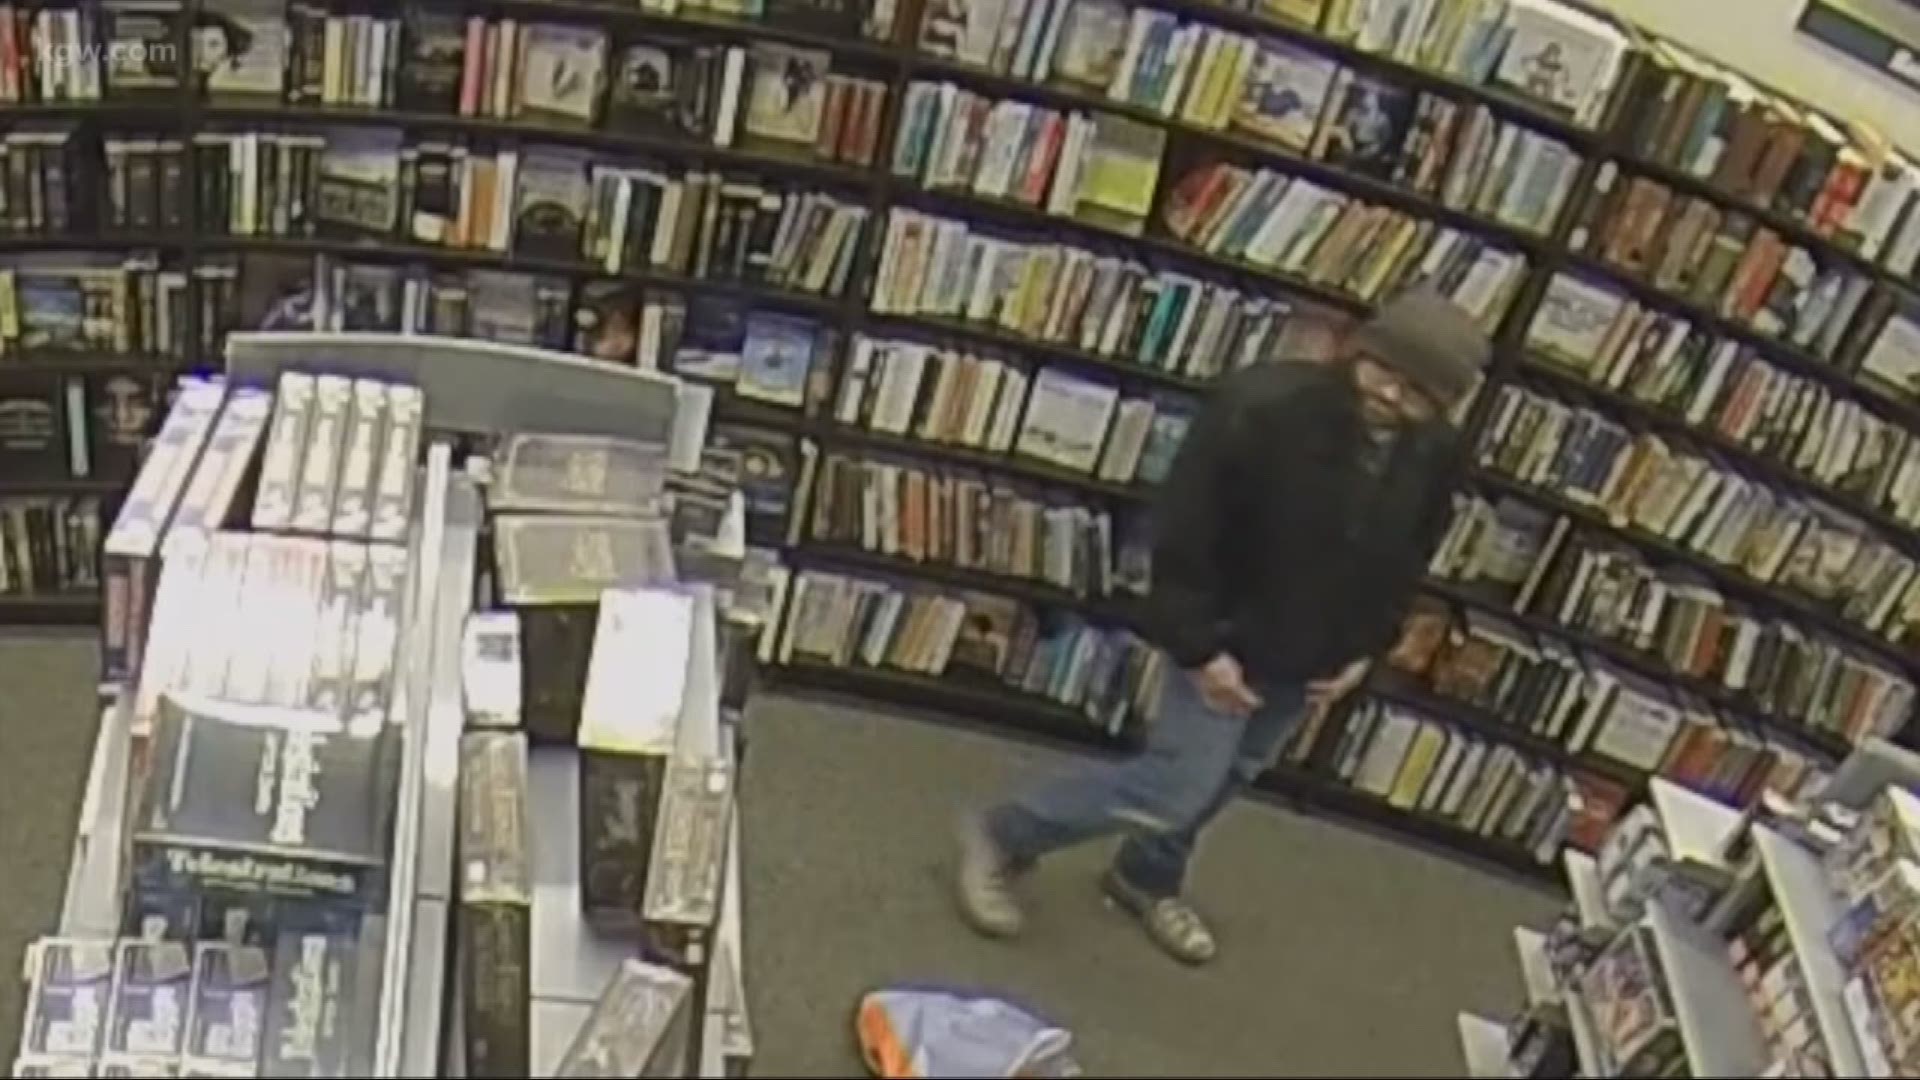 A man accused of inappropriately touching women at a Clackamas Town Center bookstore was arrested on Wednesday.